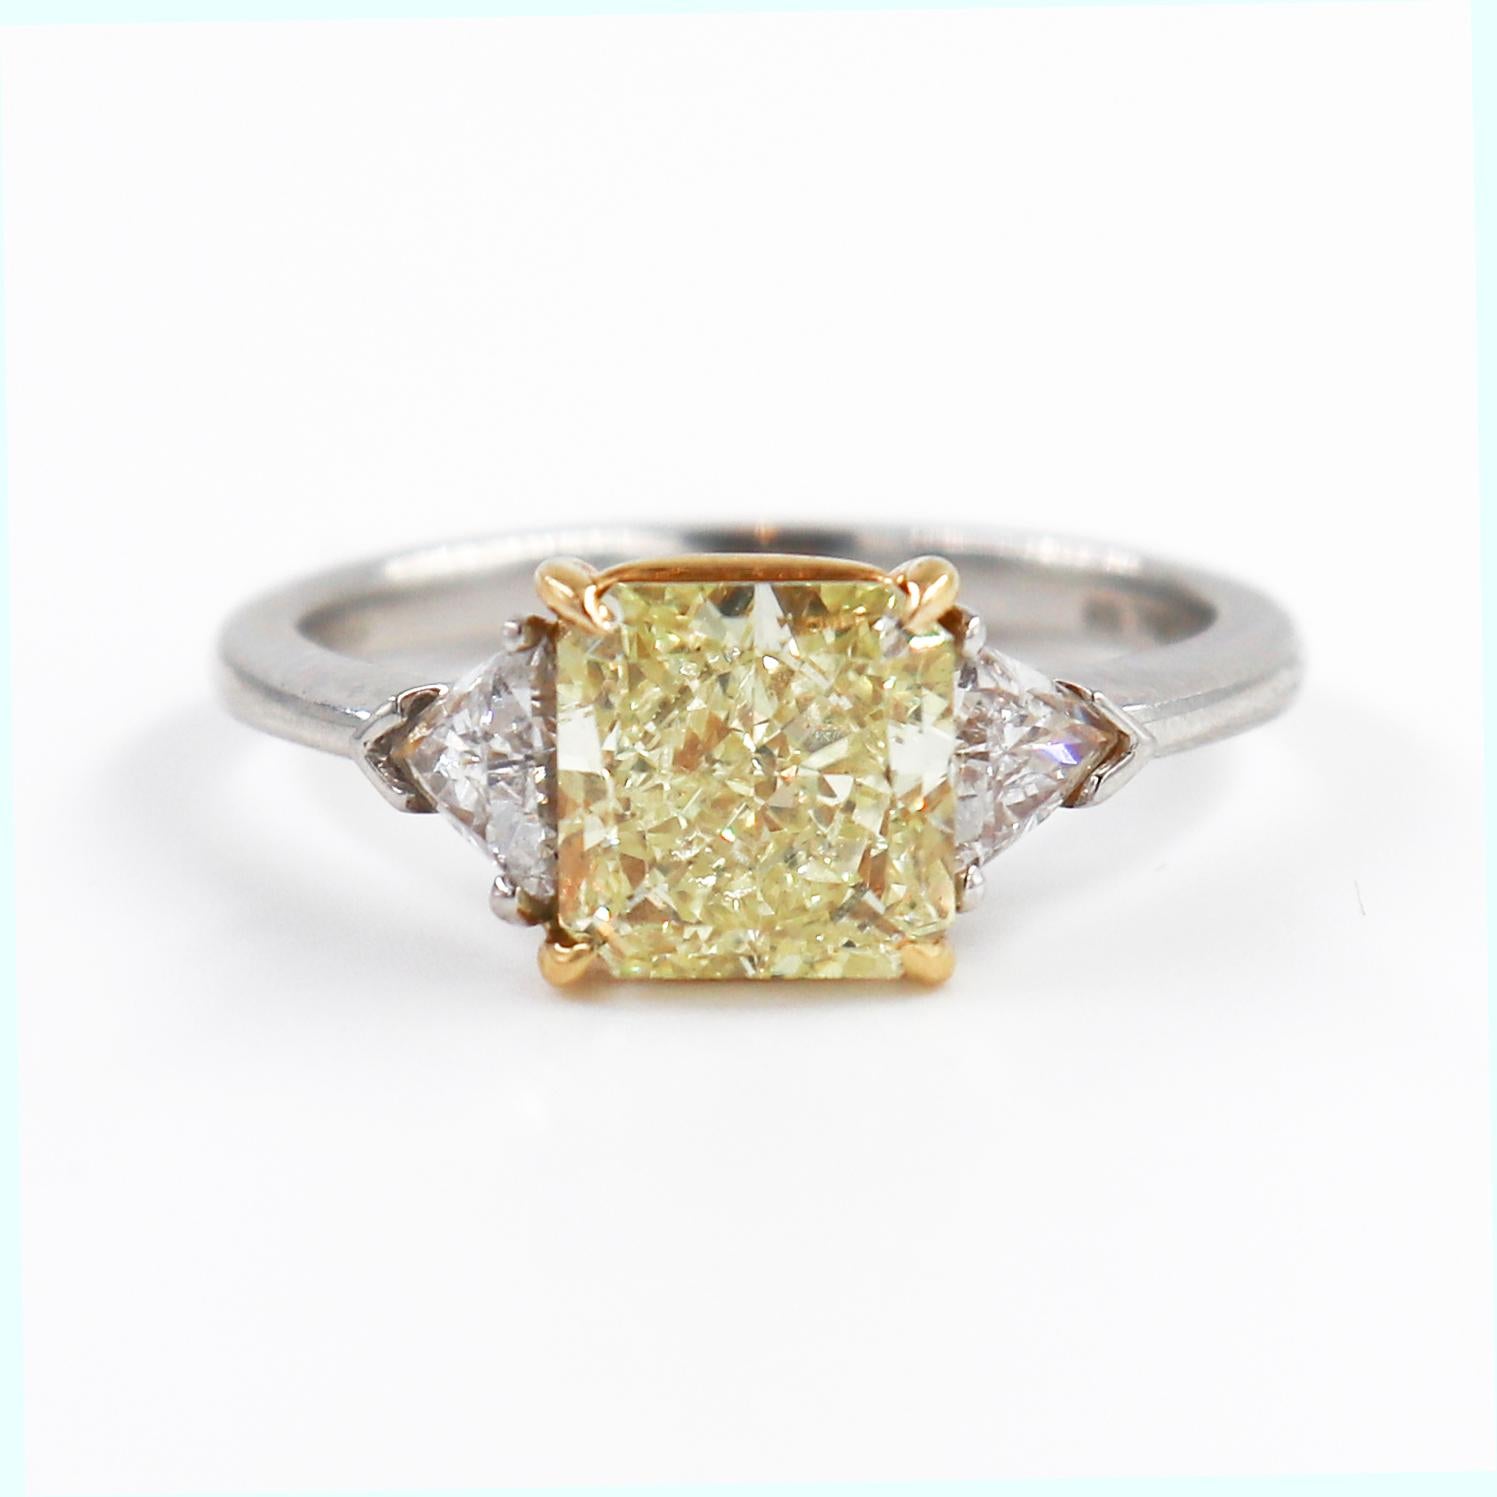 This charming ring is a fresh, bright take on the classic three stone design. It features a 2.03 carat radiant diamond certified by GIA to be a fancy yellow color. This brilliant, saturated radiant diamond contrasts beautifully with the bright white